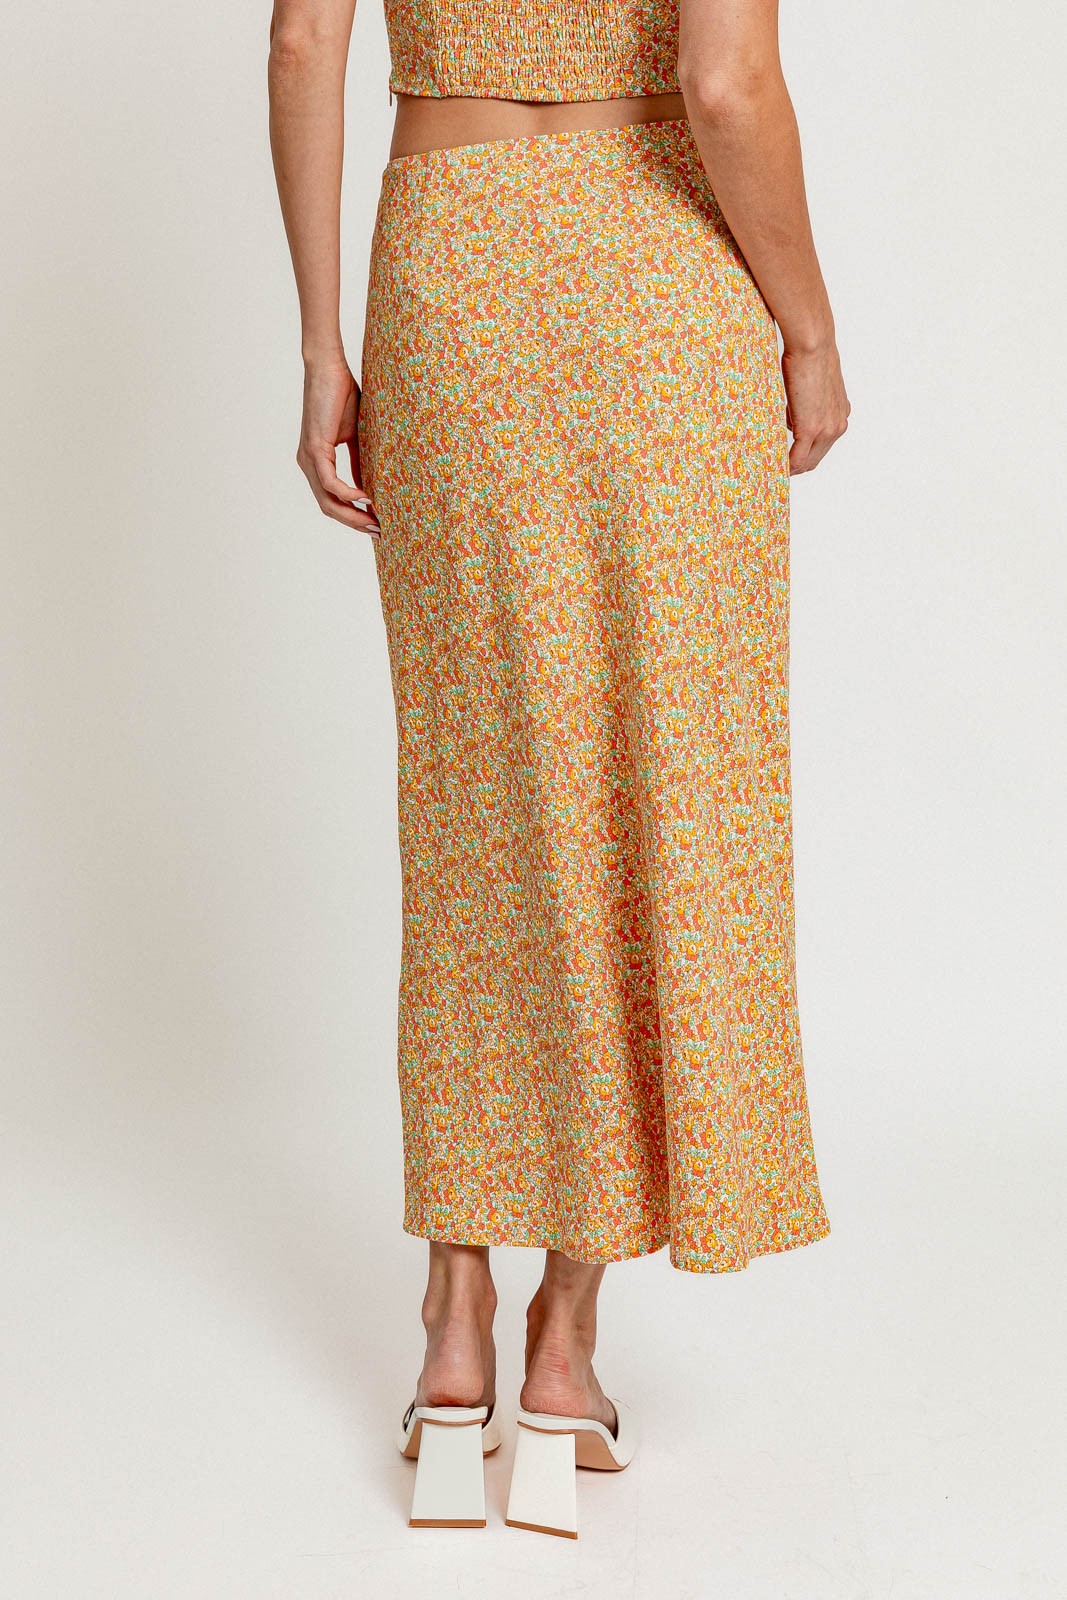 Love and Blooms Skirt